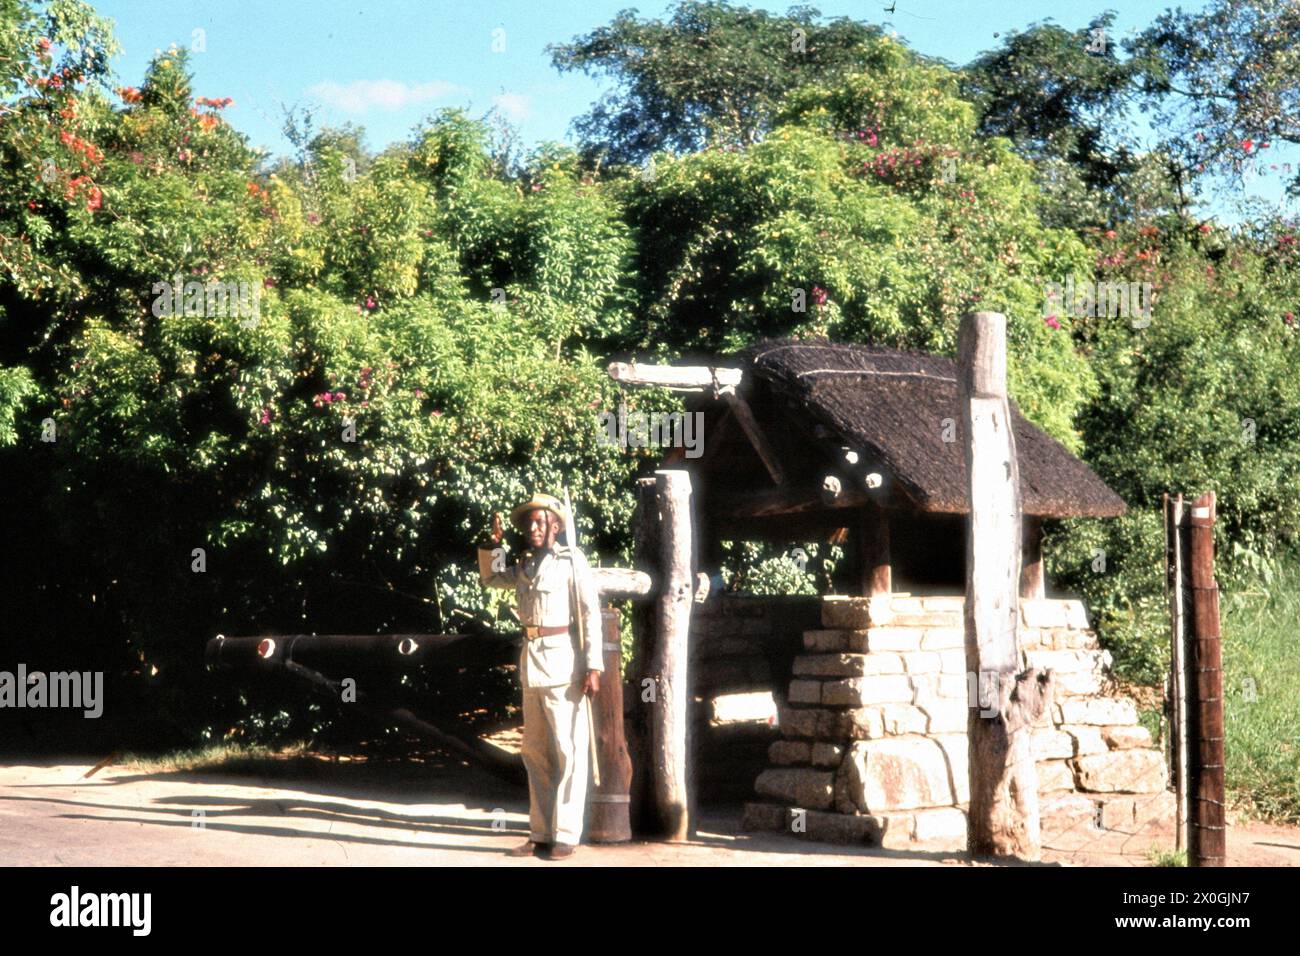 An armed guard at Numbi Gate in a Ndebele village in Kruger National Park in north-eastern South Africa. [automated translation] Stock Photo